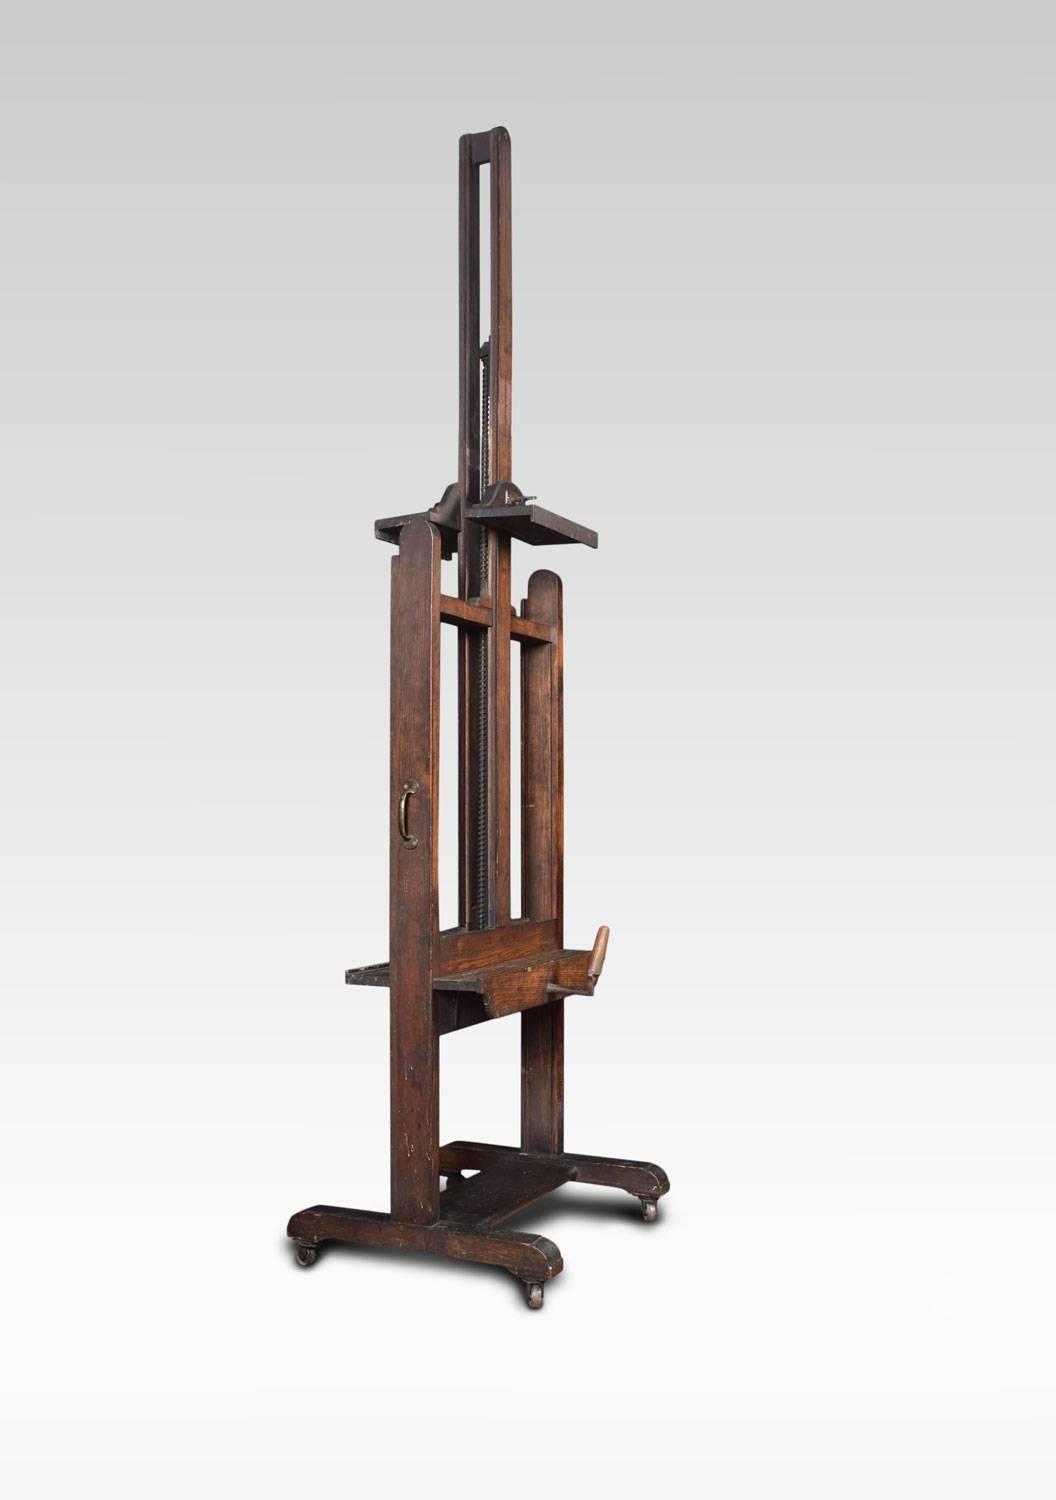 Large studio easel from the studio of Philip Reeves RSA PRSW RGI RE
The oak artist’s double sided easel, with adjustable mechanism, raised up on trestle base terminating in casters

Dimensions
Height 109 when fully extended 91 Inches when